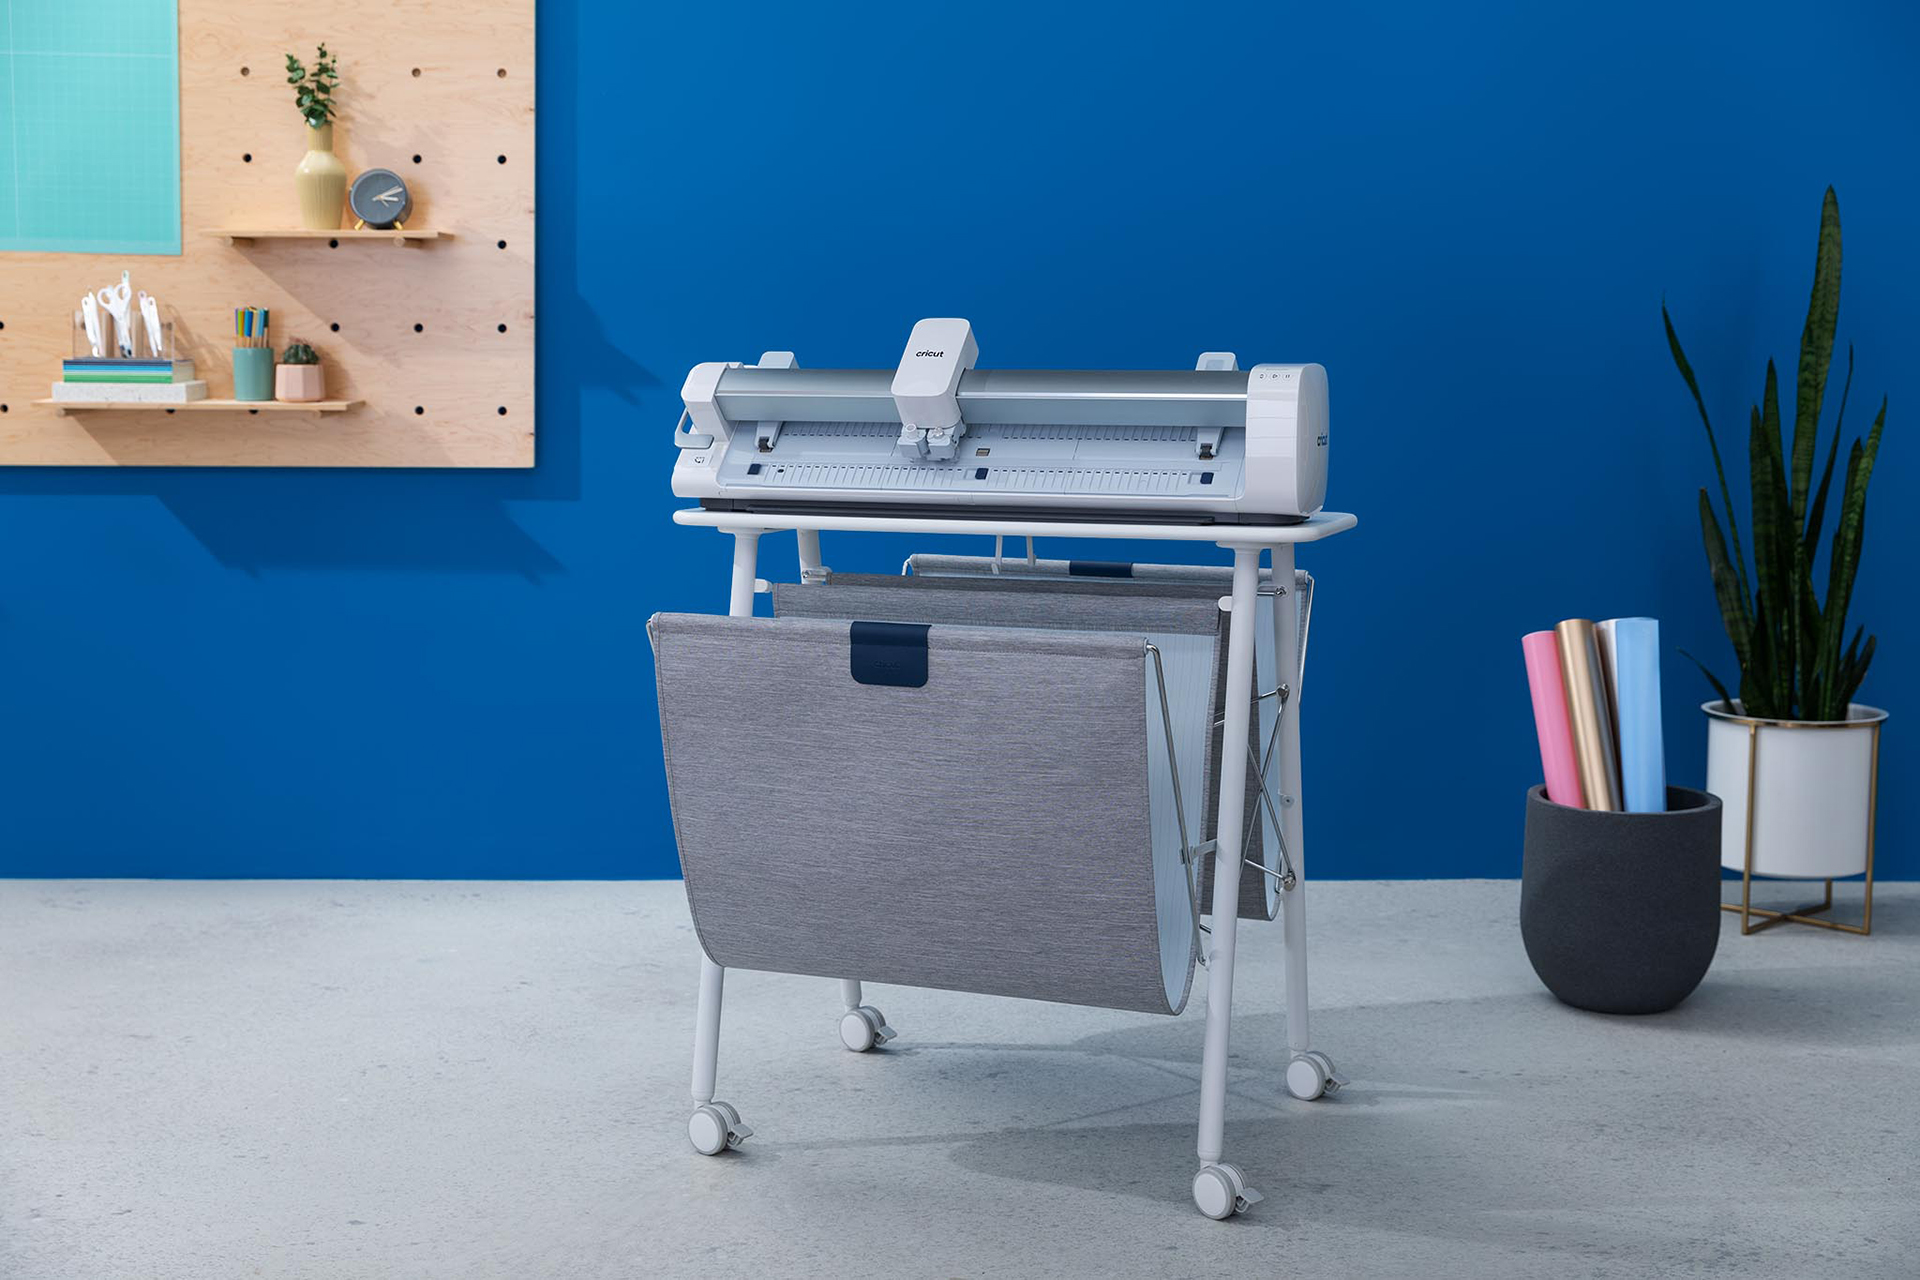 Introducing Cricut Venture, the largest and fastest cutting machine on the Cricut platform